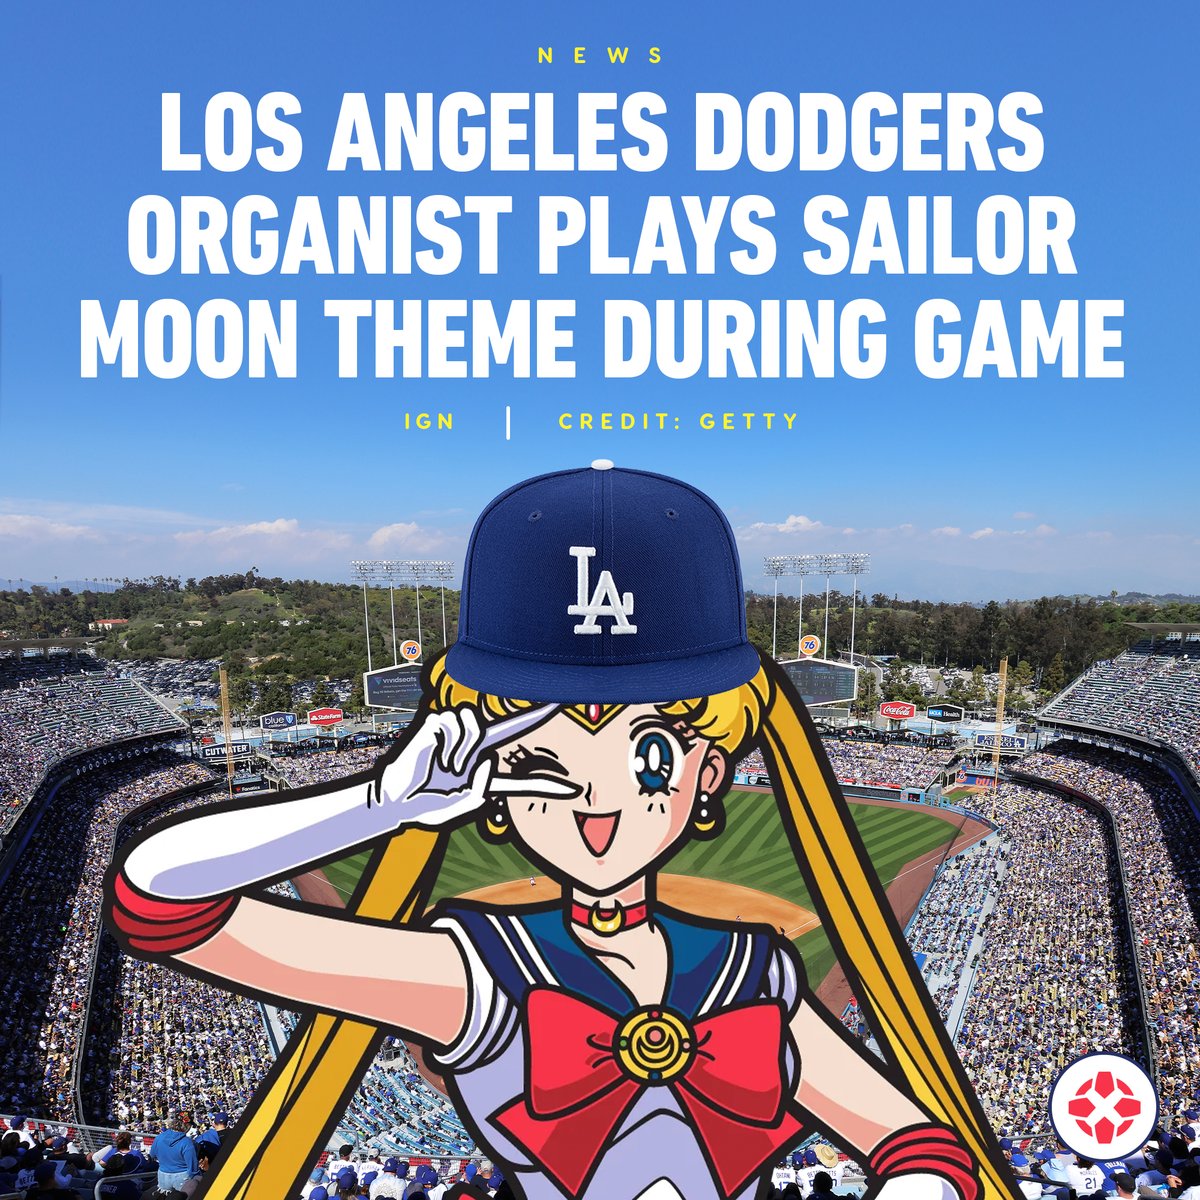 Los Angeles Dodgers organist Dieter Ruehle dropped the Sailor Moon theme song into Sunday's game against the St. Louis Cardinals, marking the latest anime nod after previously playing music from Attack on Titan.